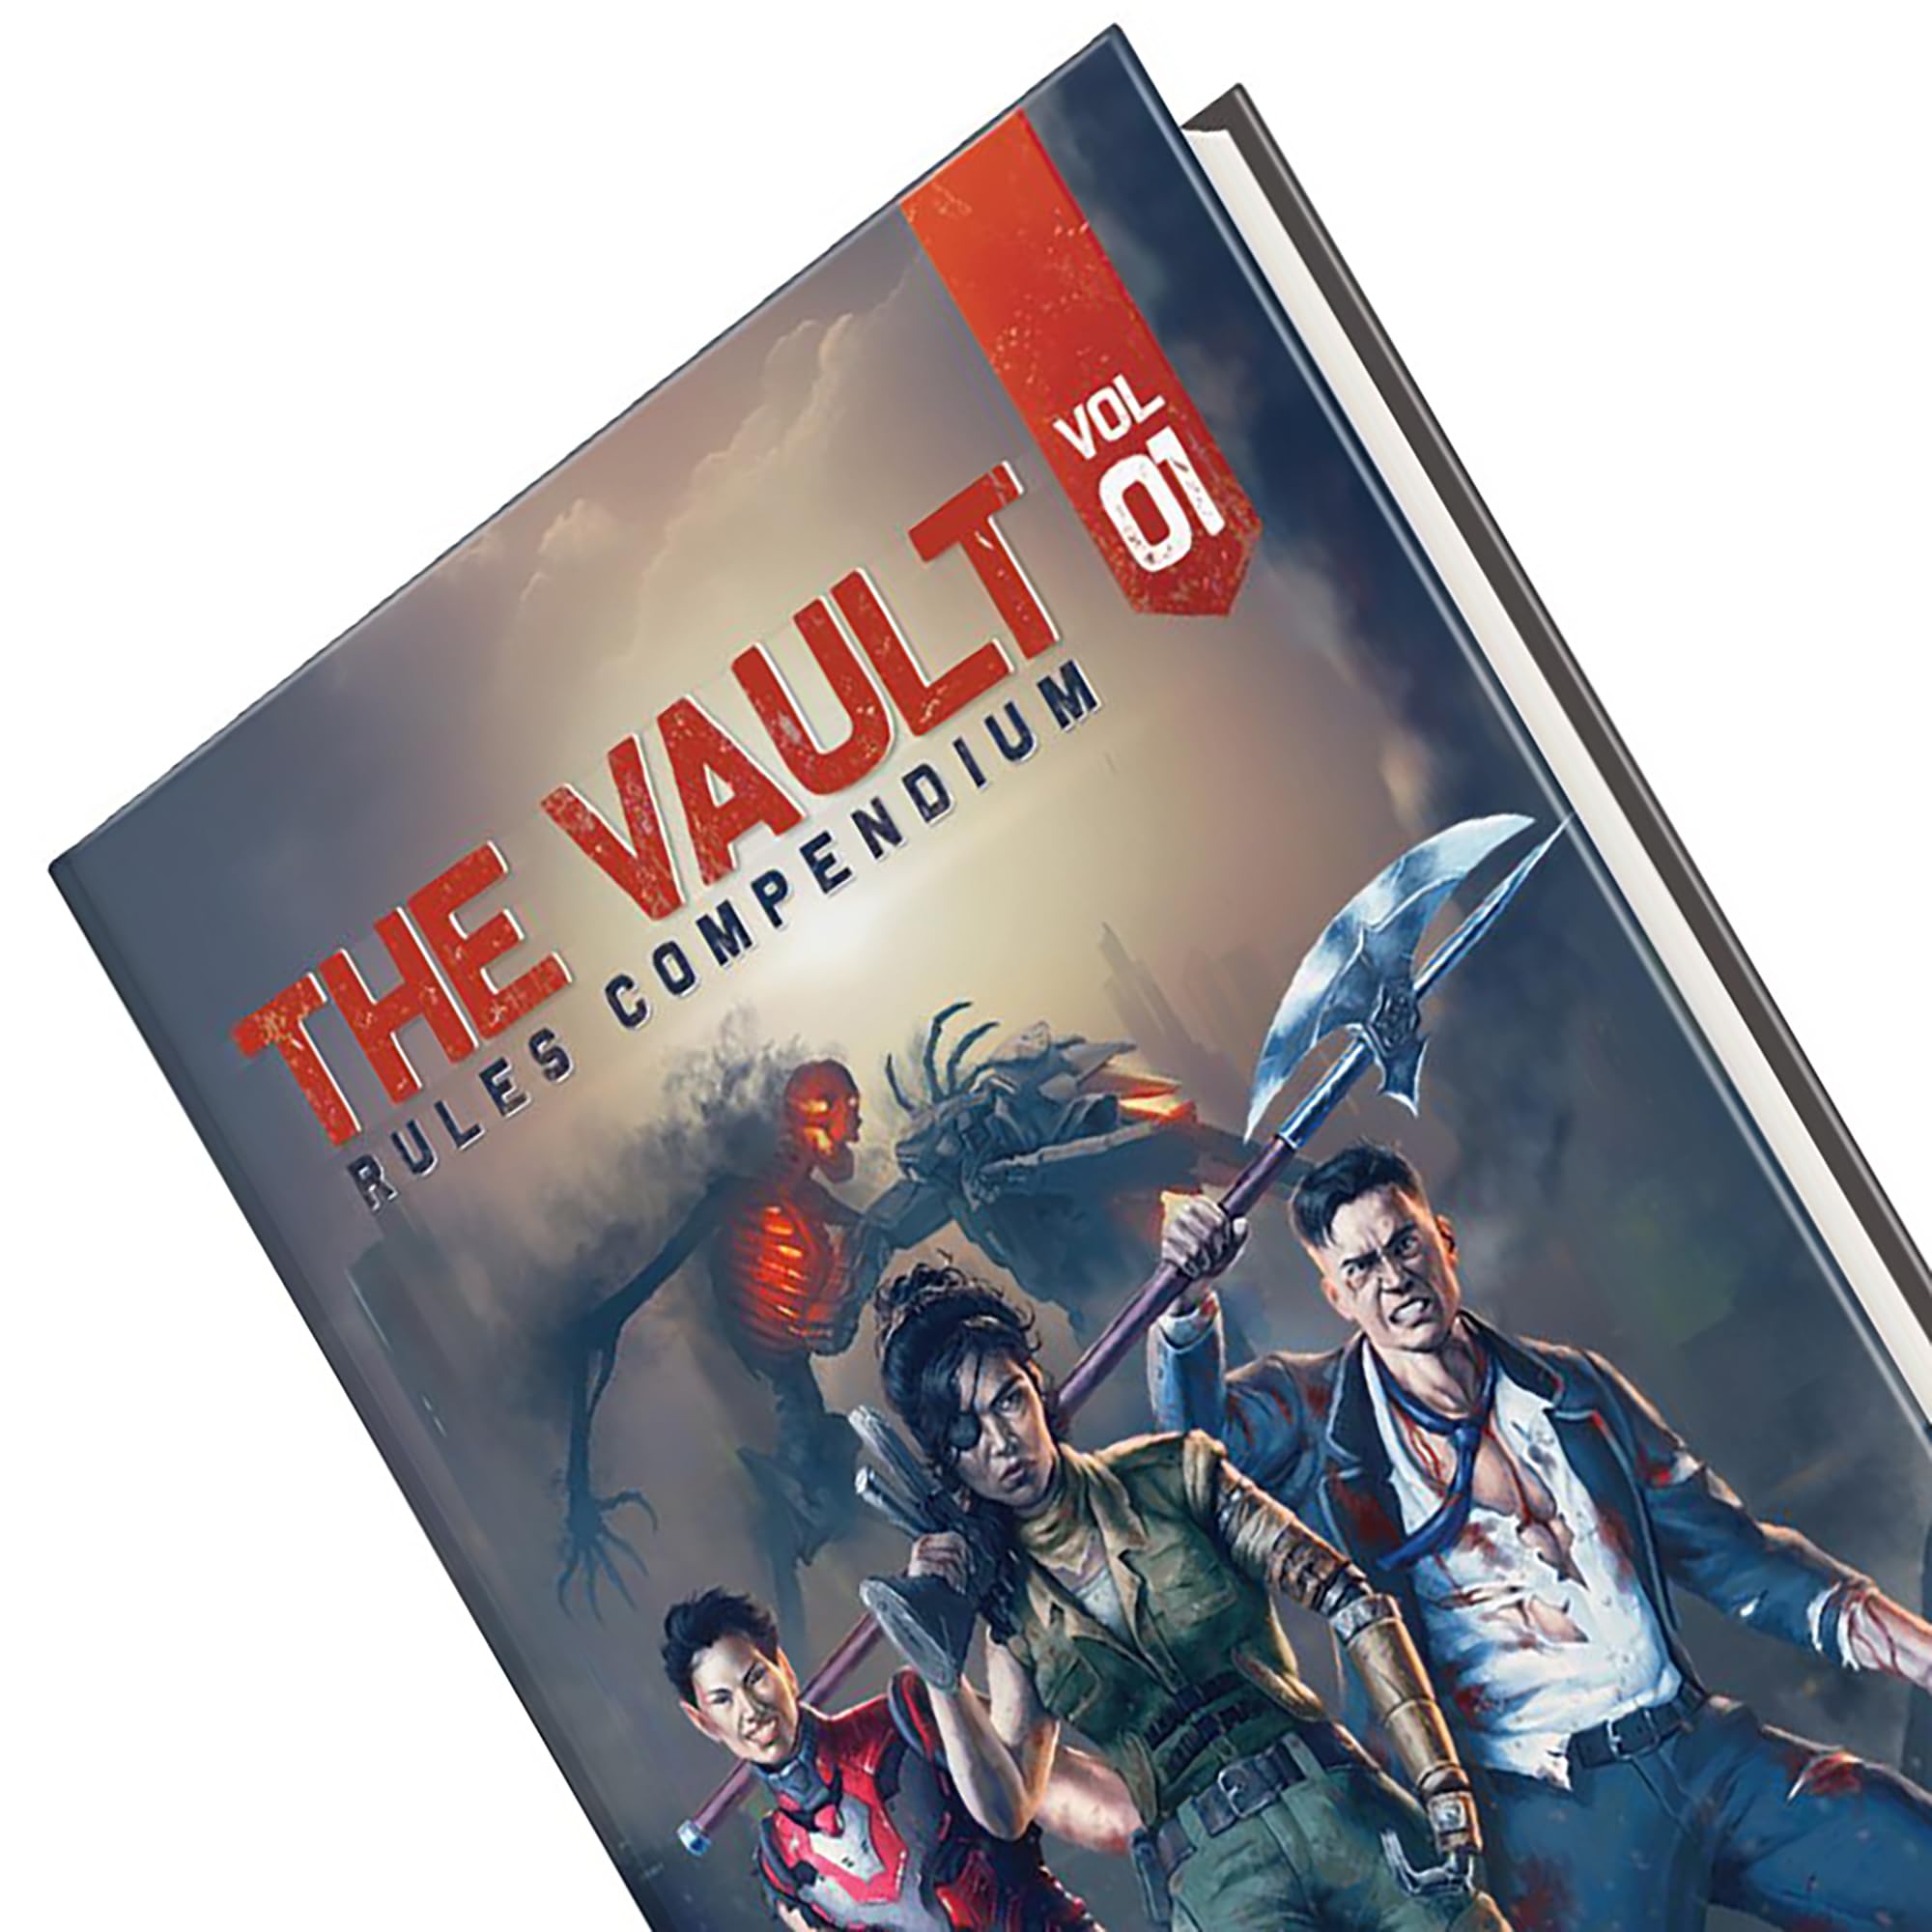 Everyday Heroes: The Vault: Rules Compendium Vol 1 - Cinematic Adventures Rules, Hardcover RPG Book, Expanded Rules & Options, Roleplaying